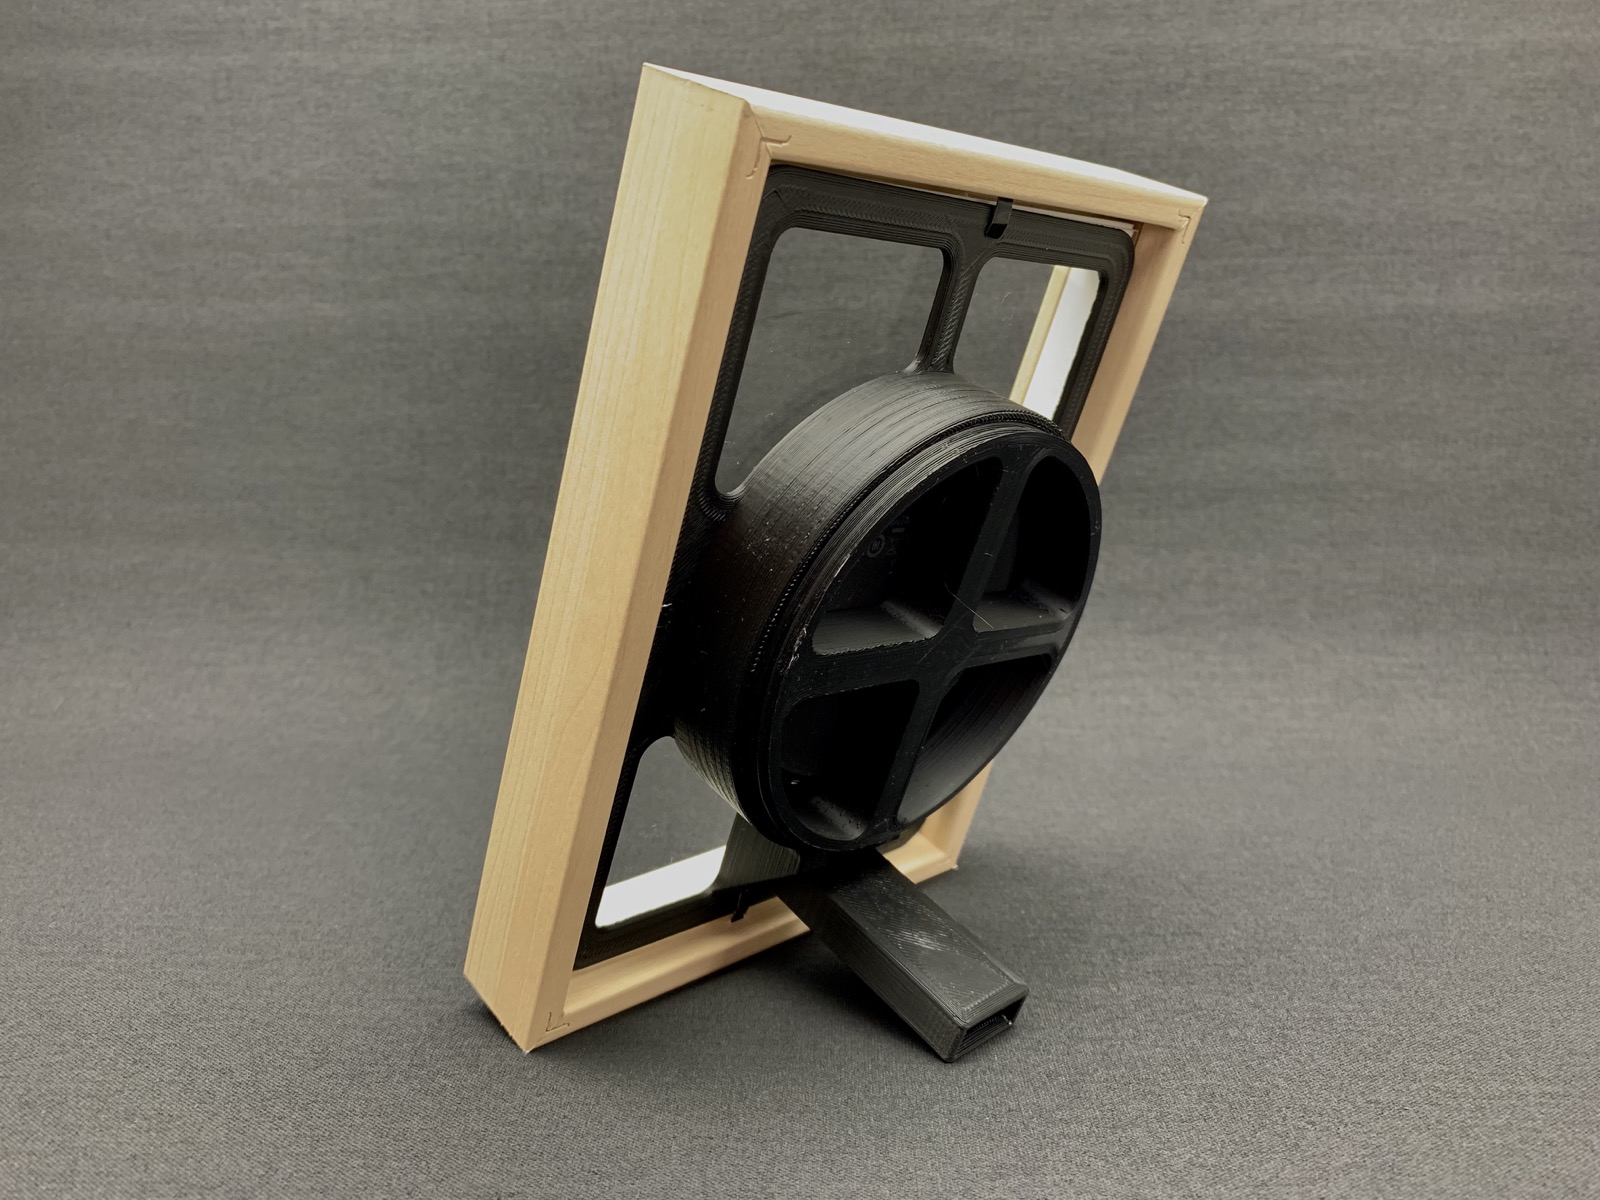 Qi charger picture frame insert